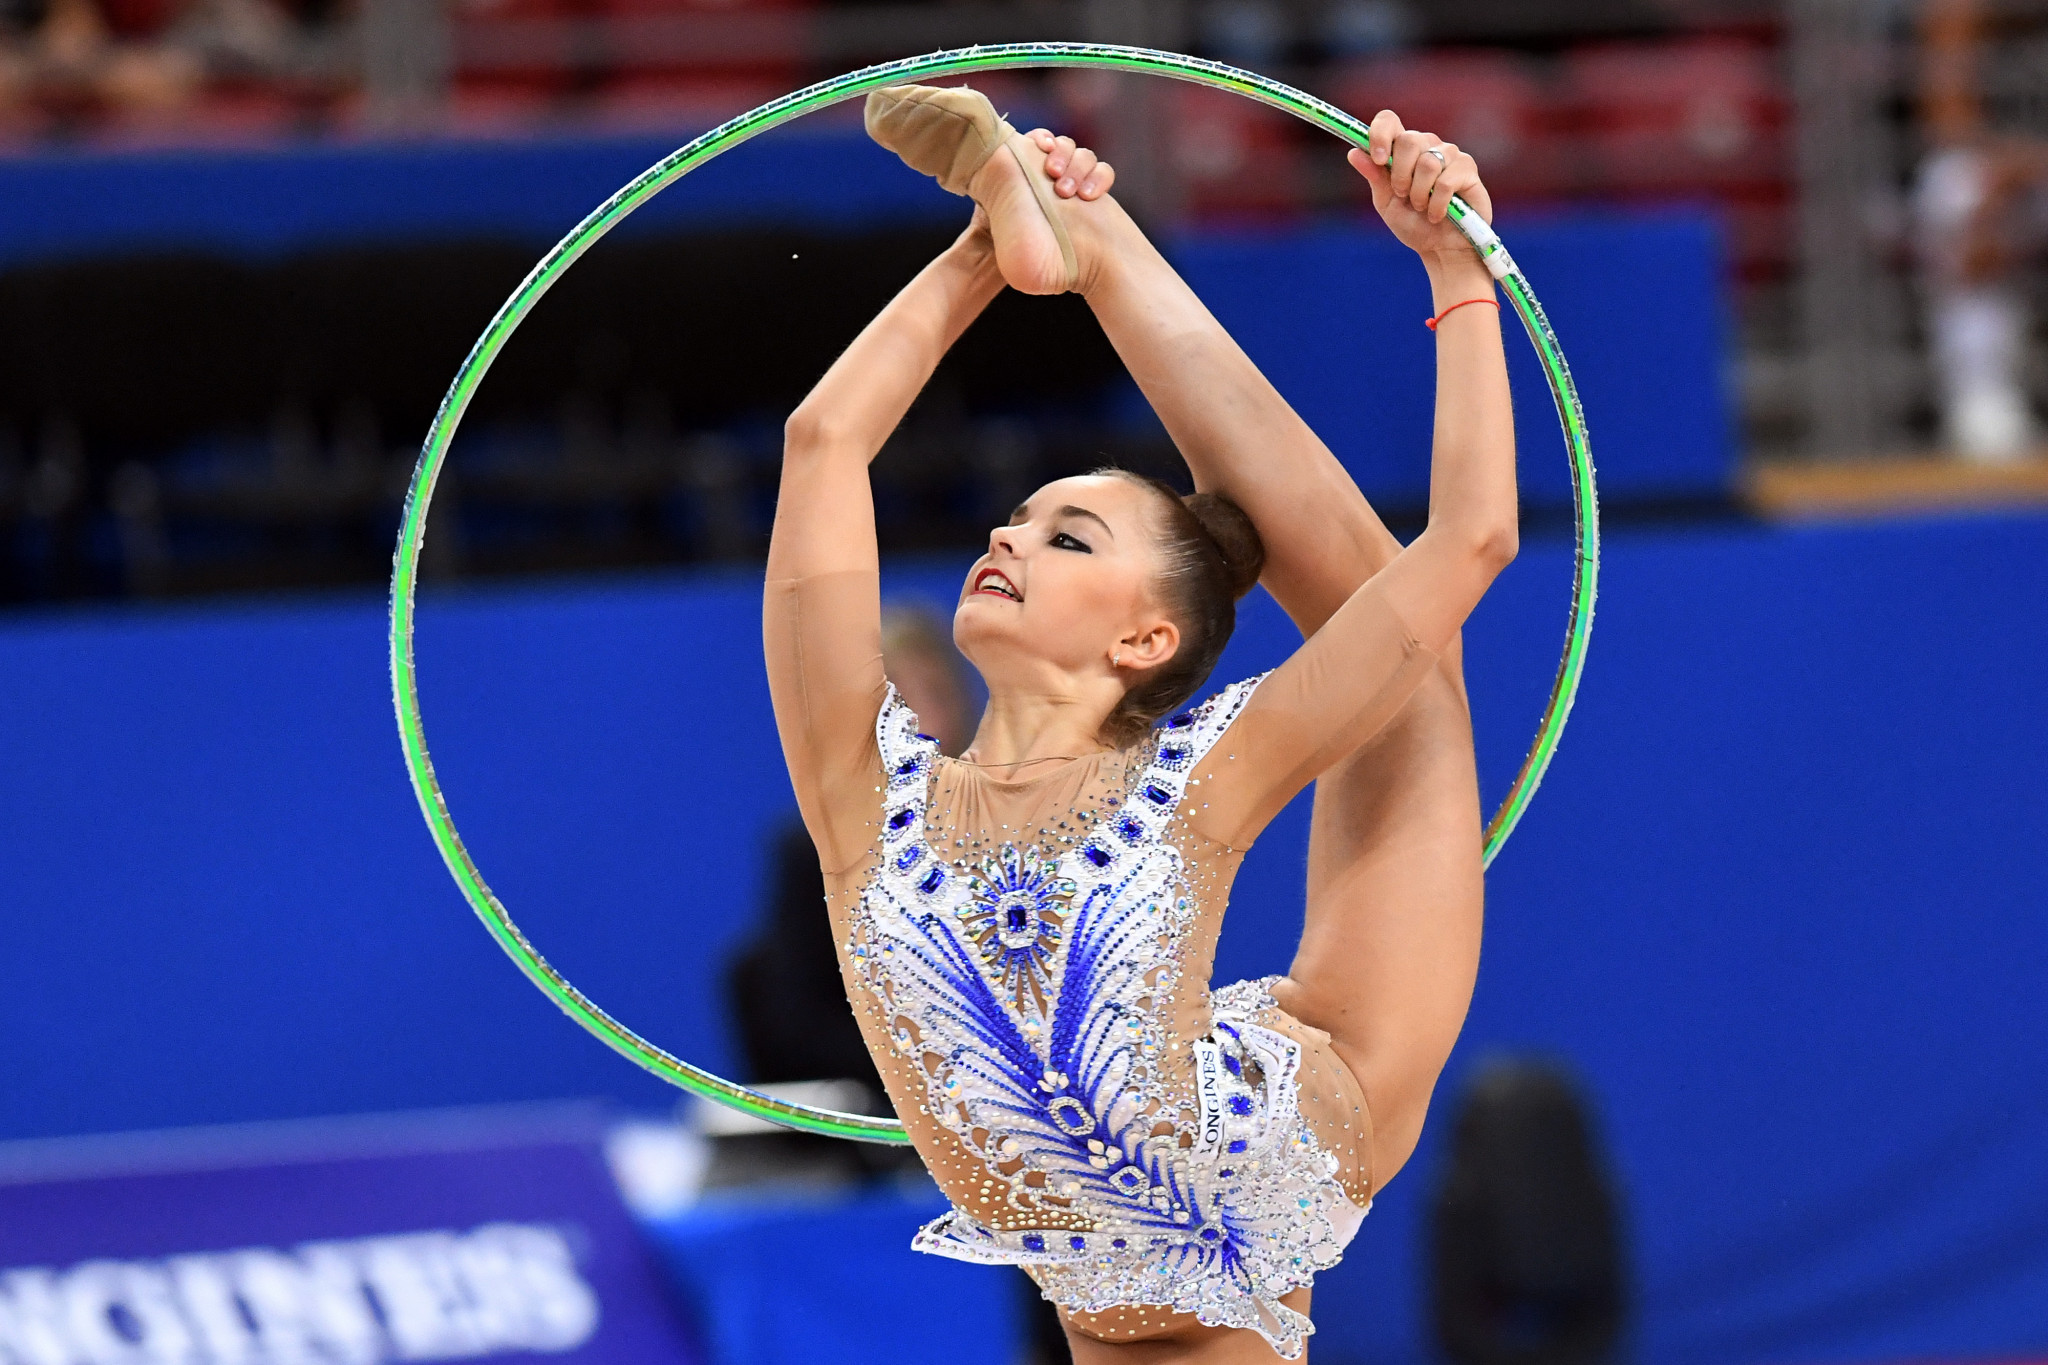 Three-time world gold medallist Arina Averina of Russia topped the senior individual hoop and ball qualification rankings on day two of the Rhythmic Gymnastics European Championships in Baku ©Getty Images